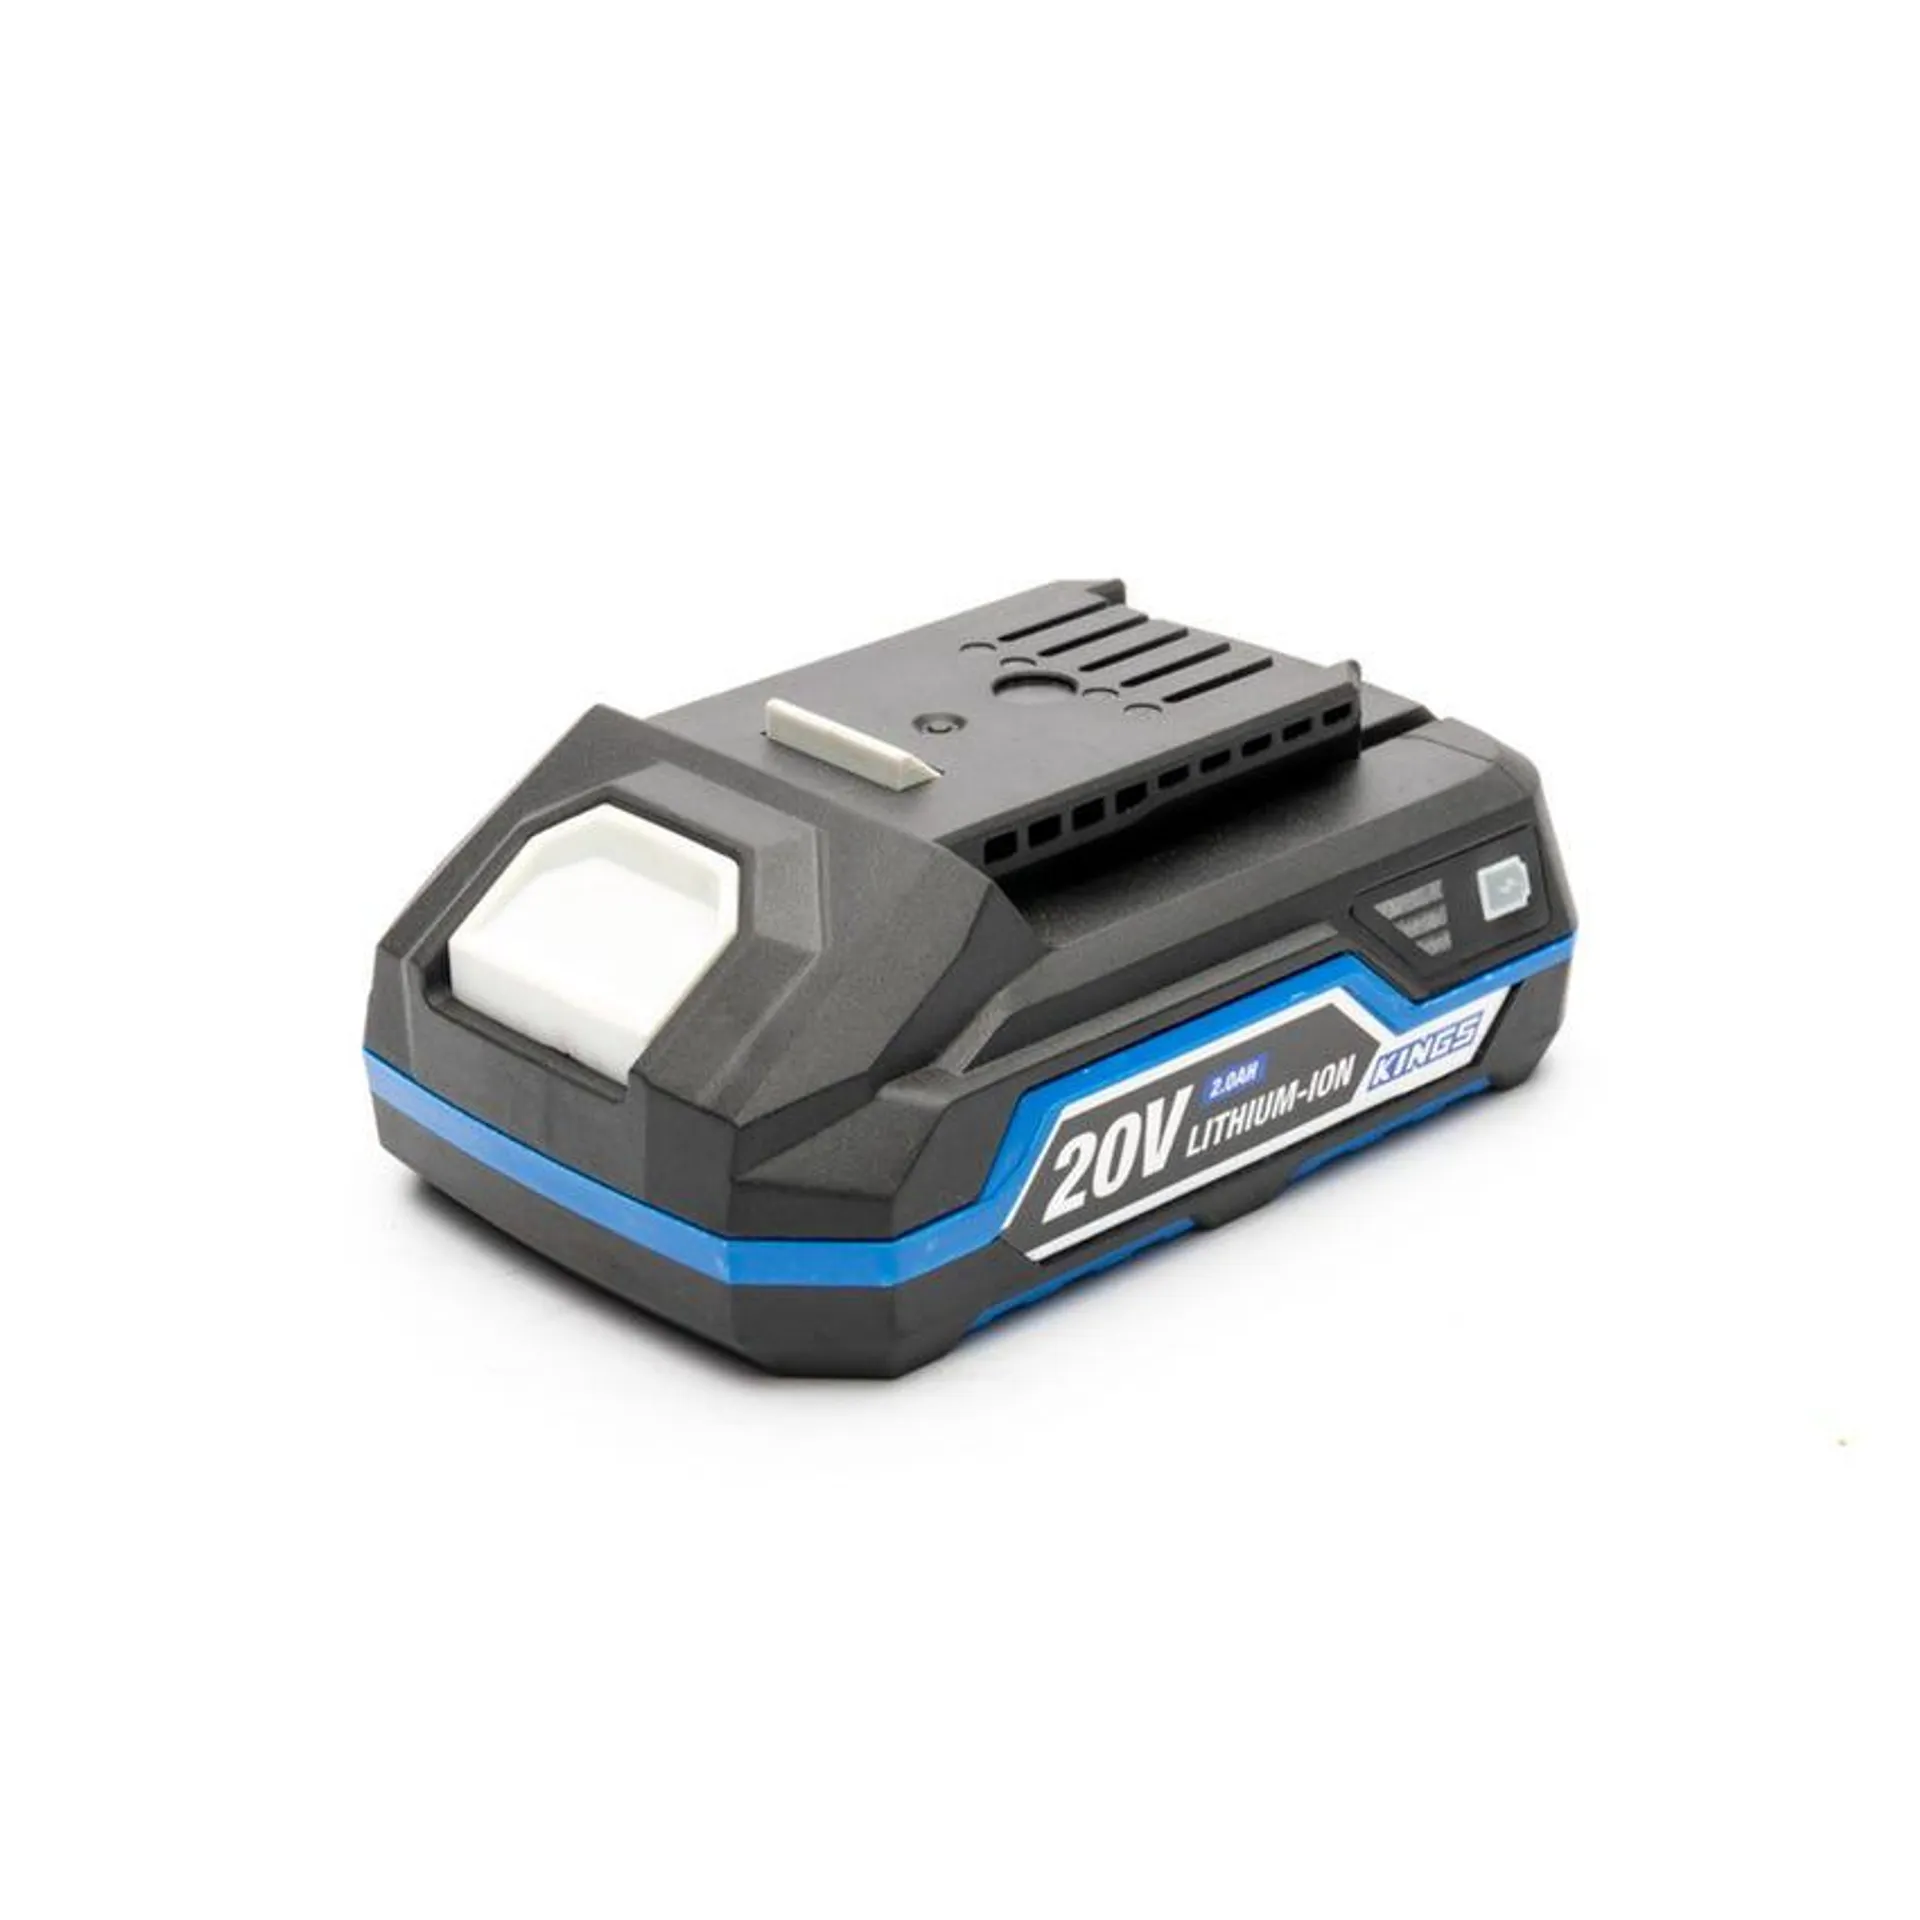 Kings 20V 2Ah Lithium Ion Battery | LED Charge Indicator | Suitable for Adventure Kings Power Tools